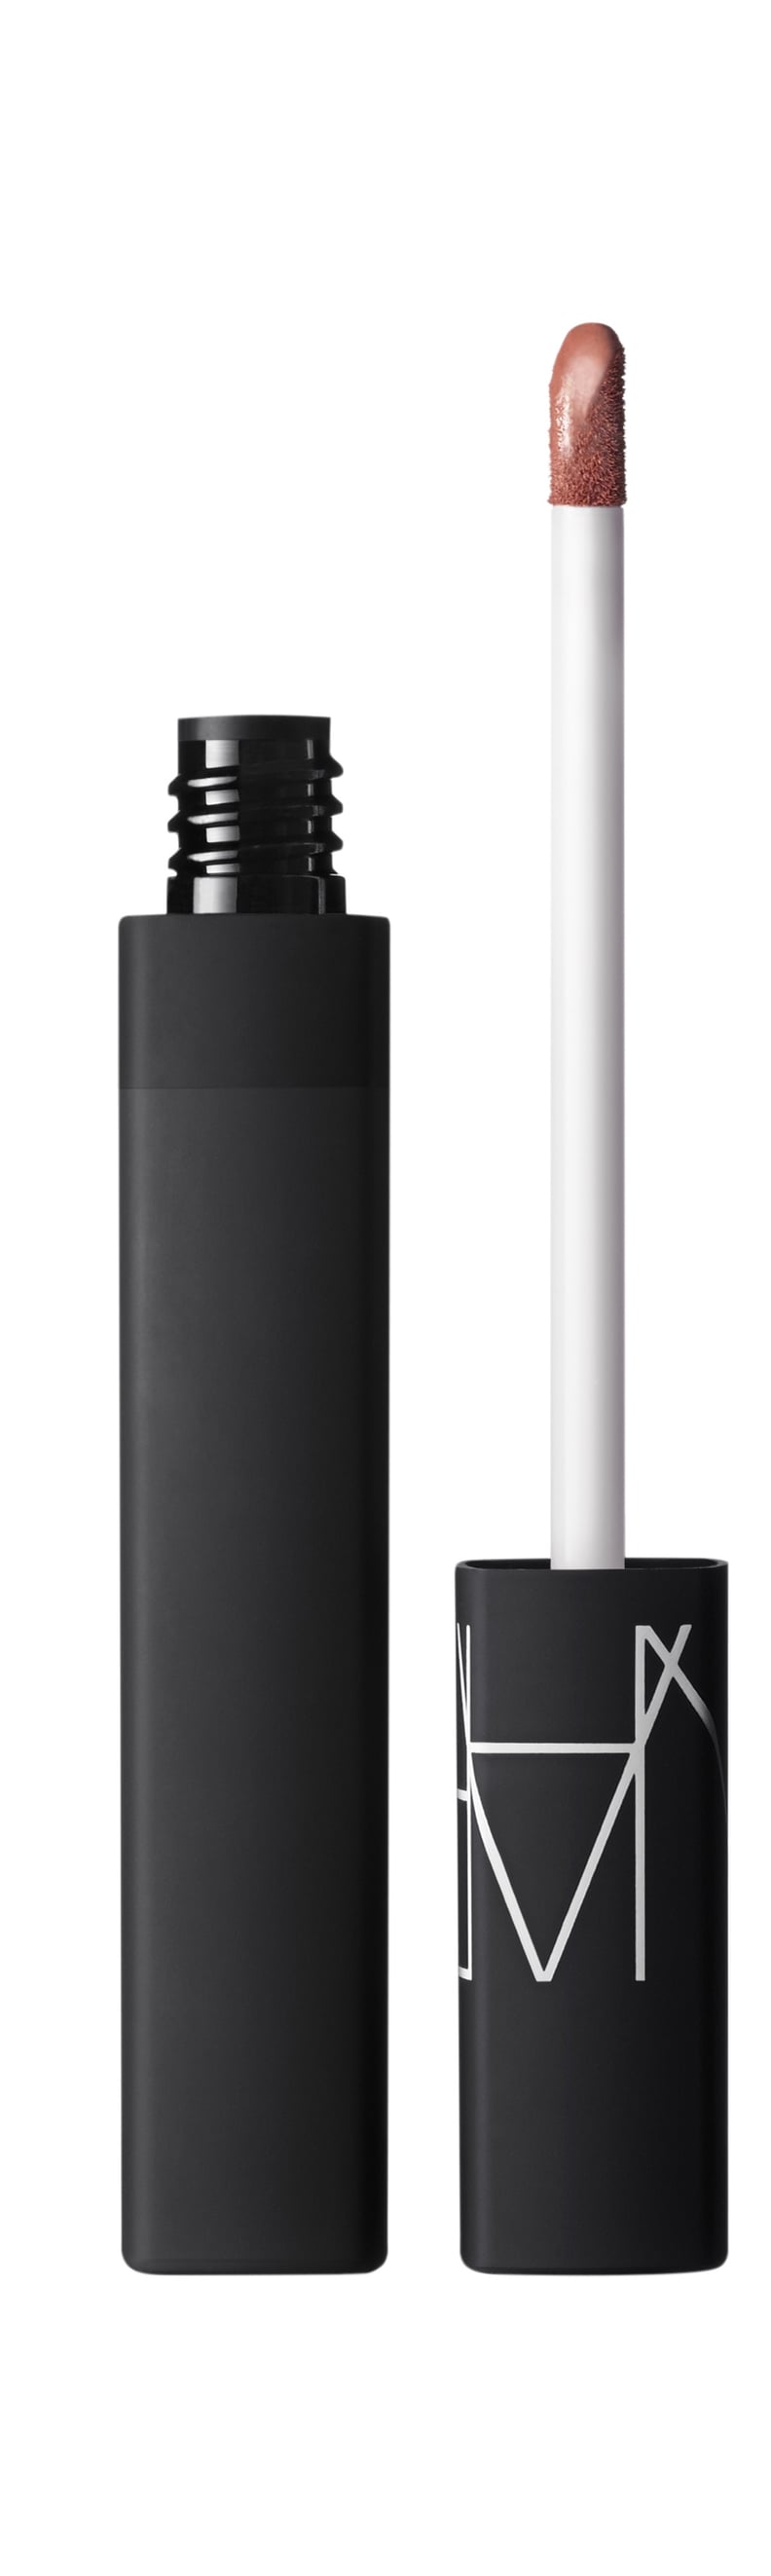 Nars Overheated Lip Cover, $28